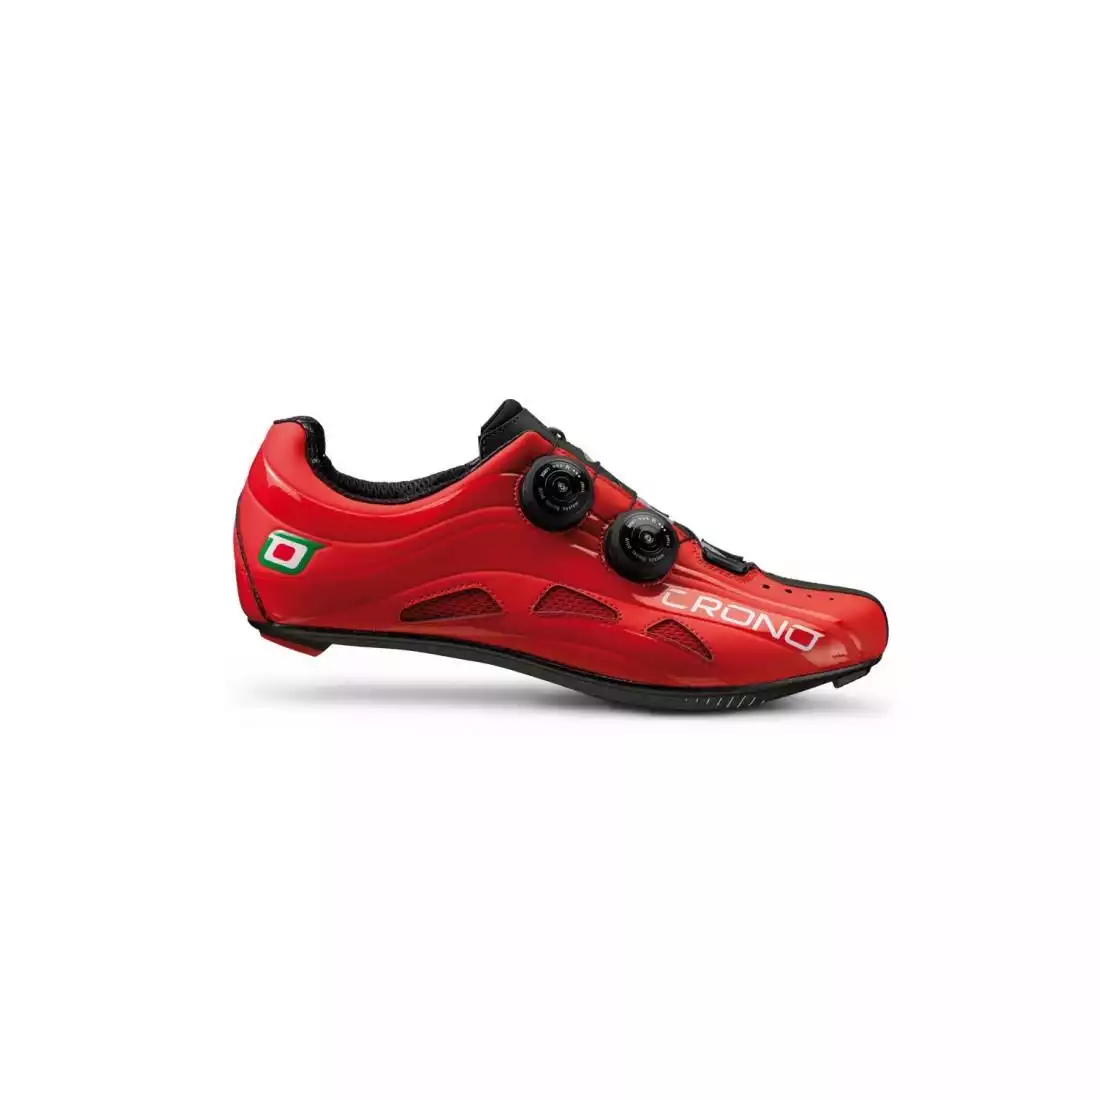 CRONO FUTURA 2 men's cycling shoes - road, red | MikeSPORT